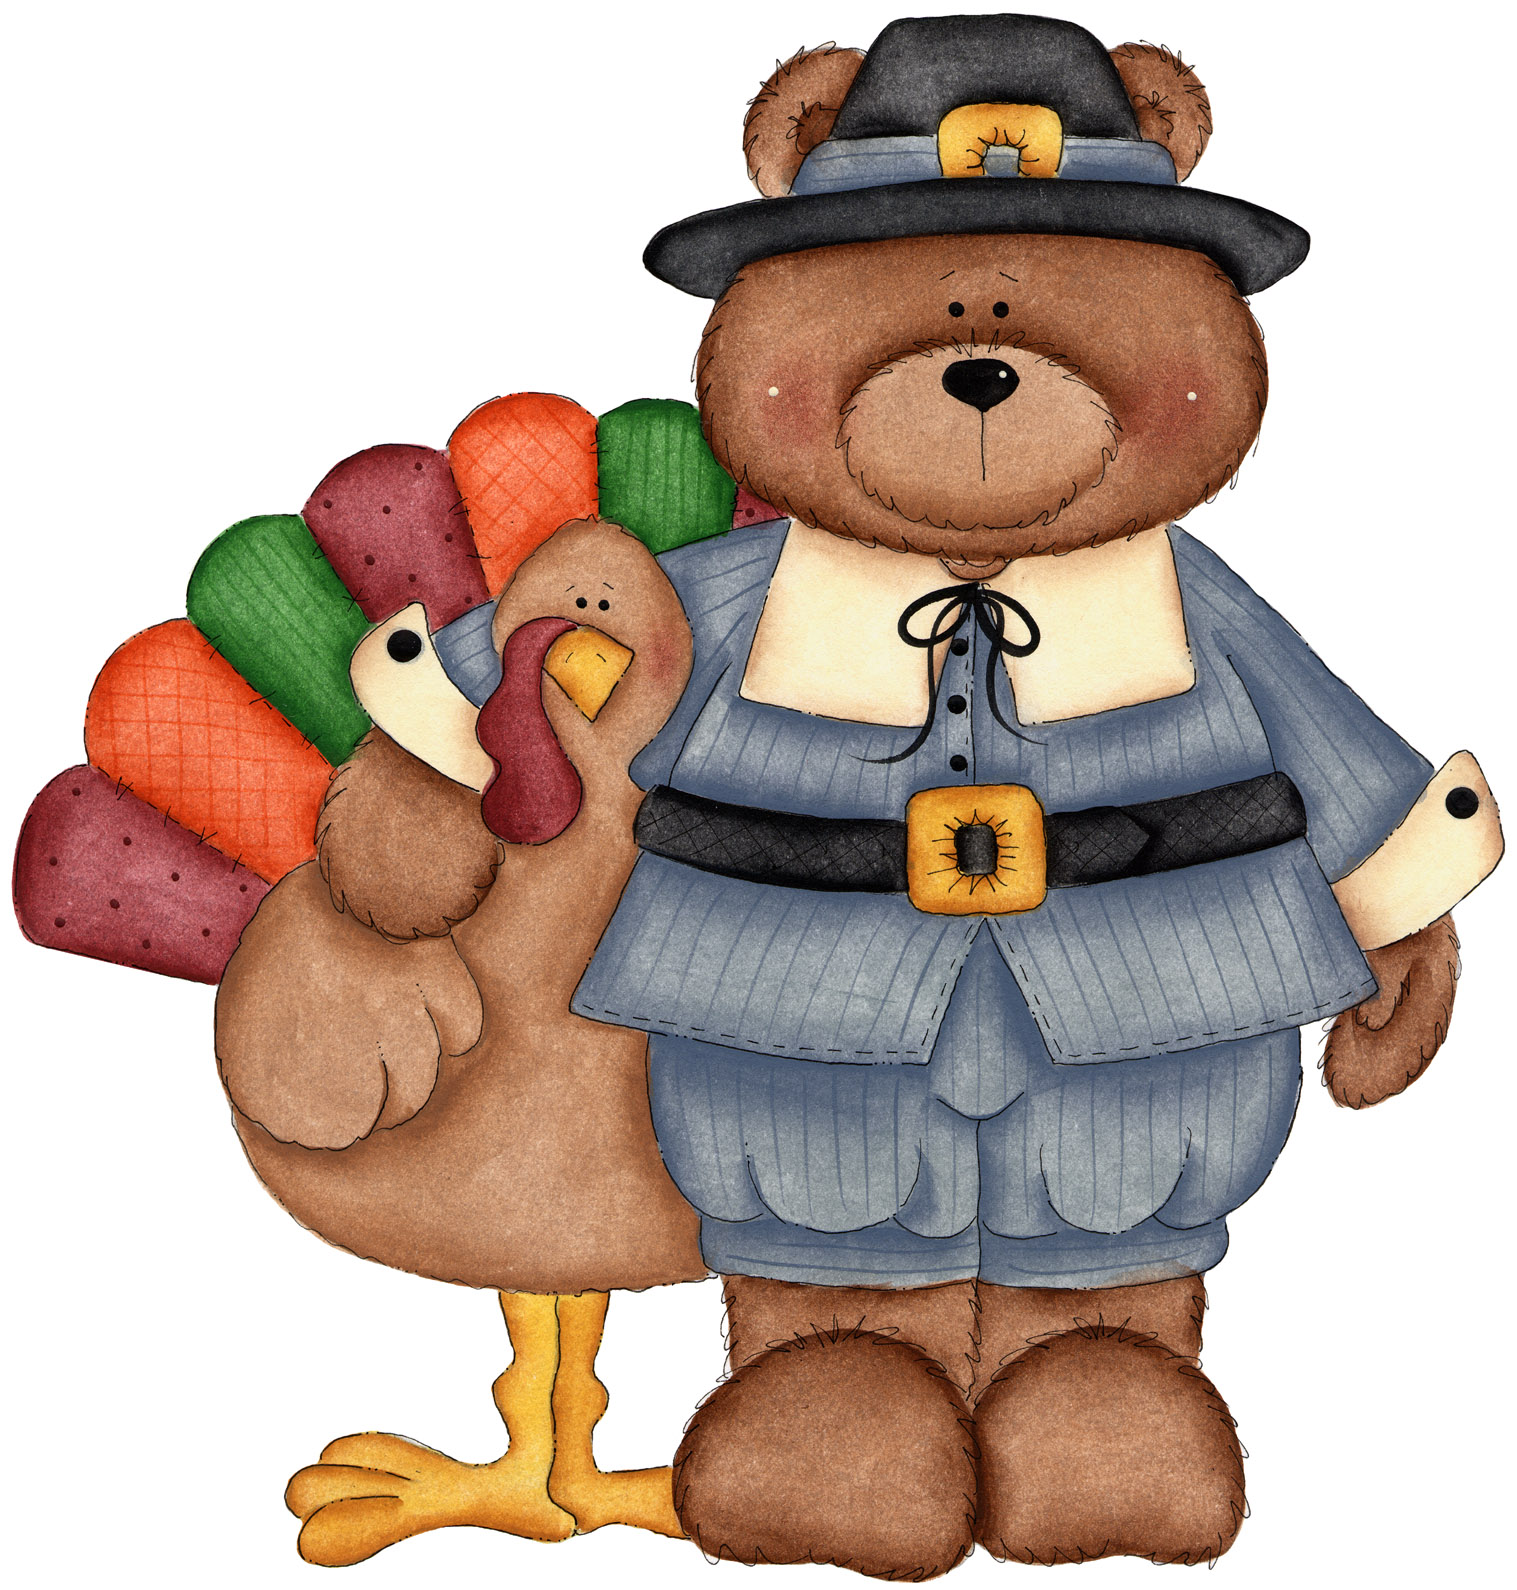 Thanksgiving Food Drive Clip Art Images & Pictures - Becuo